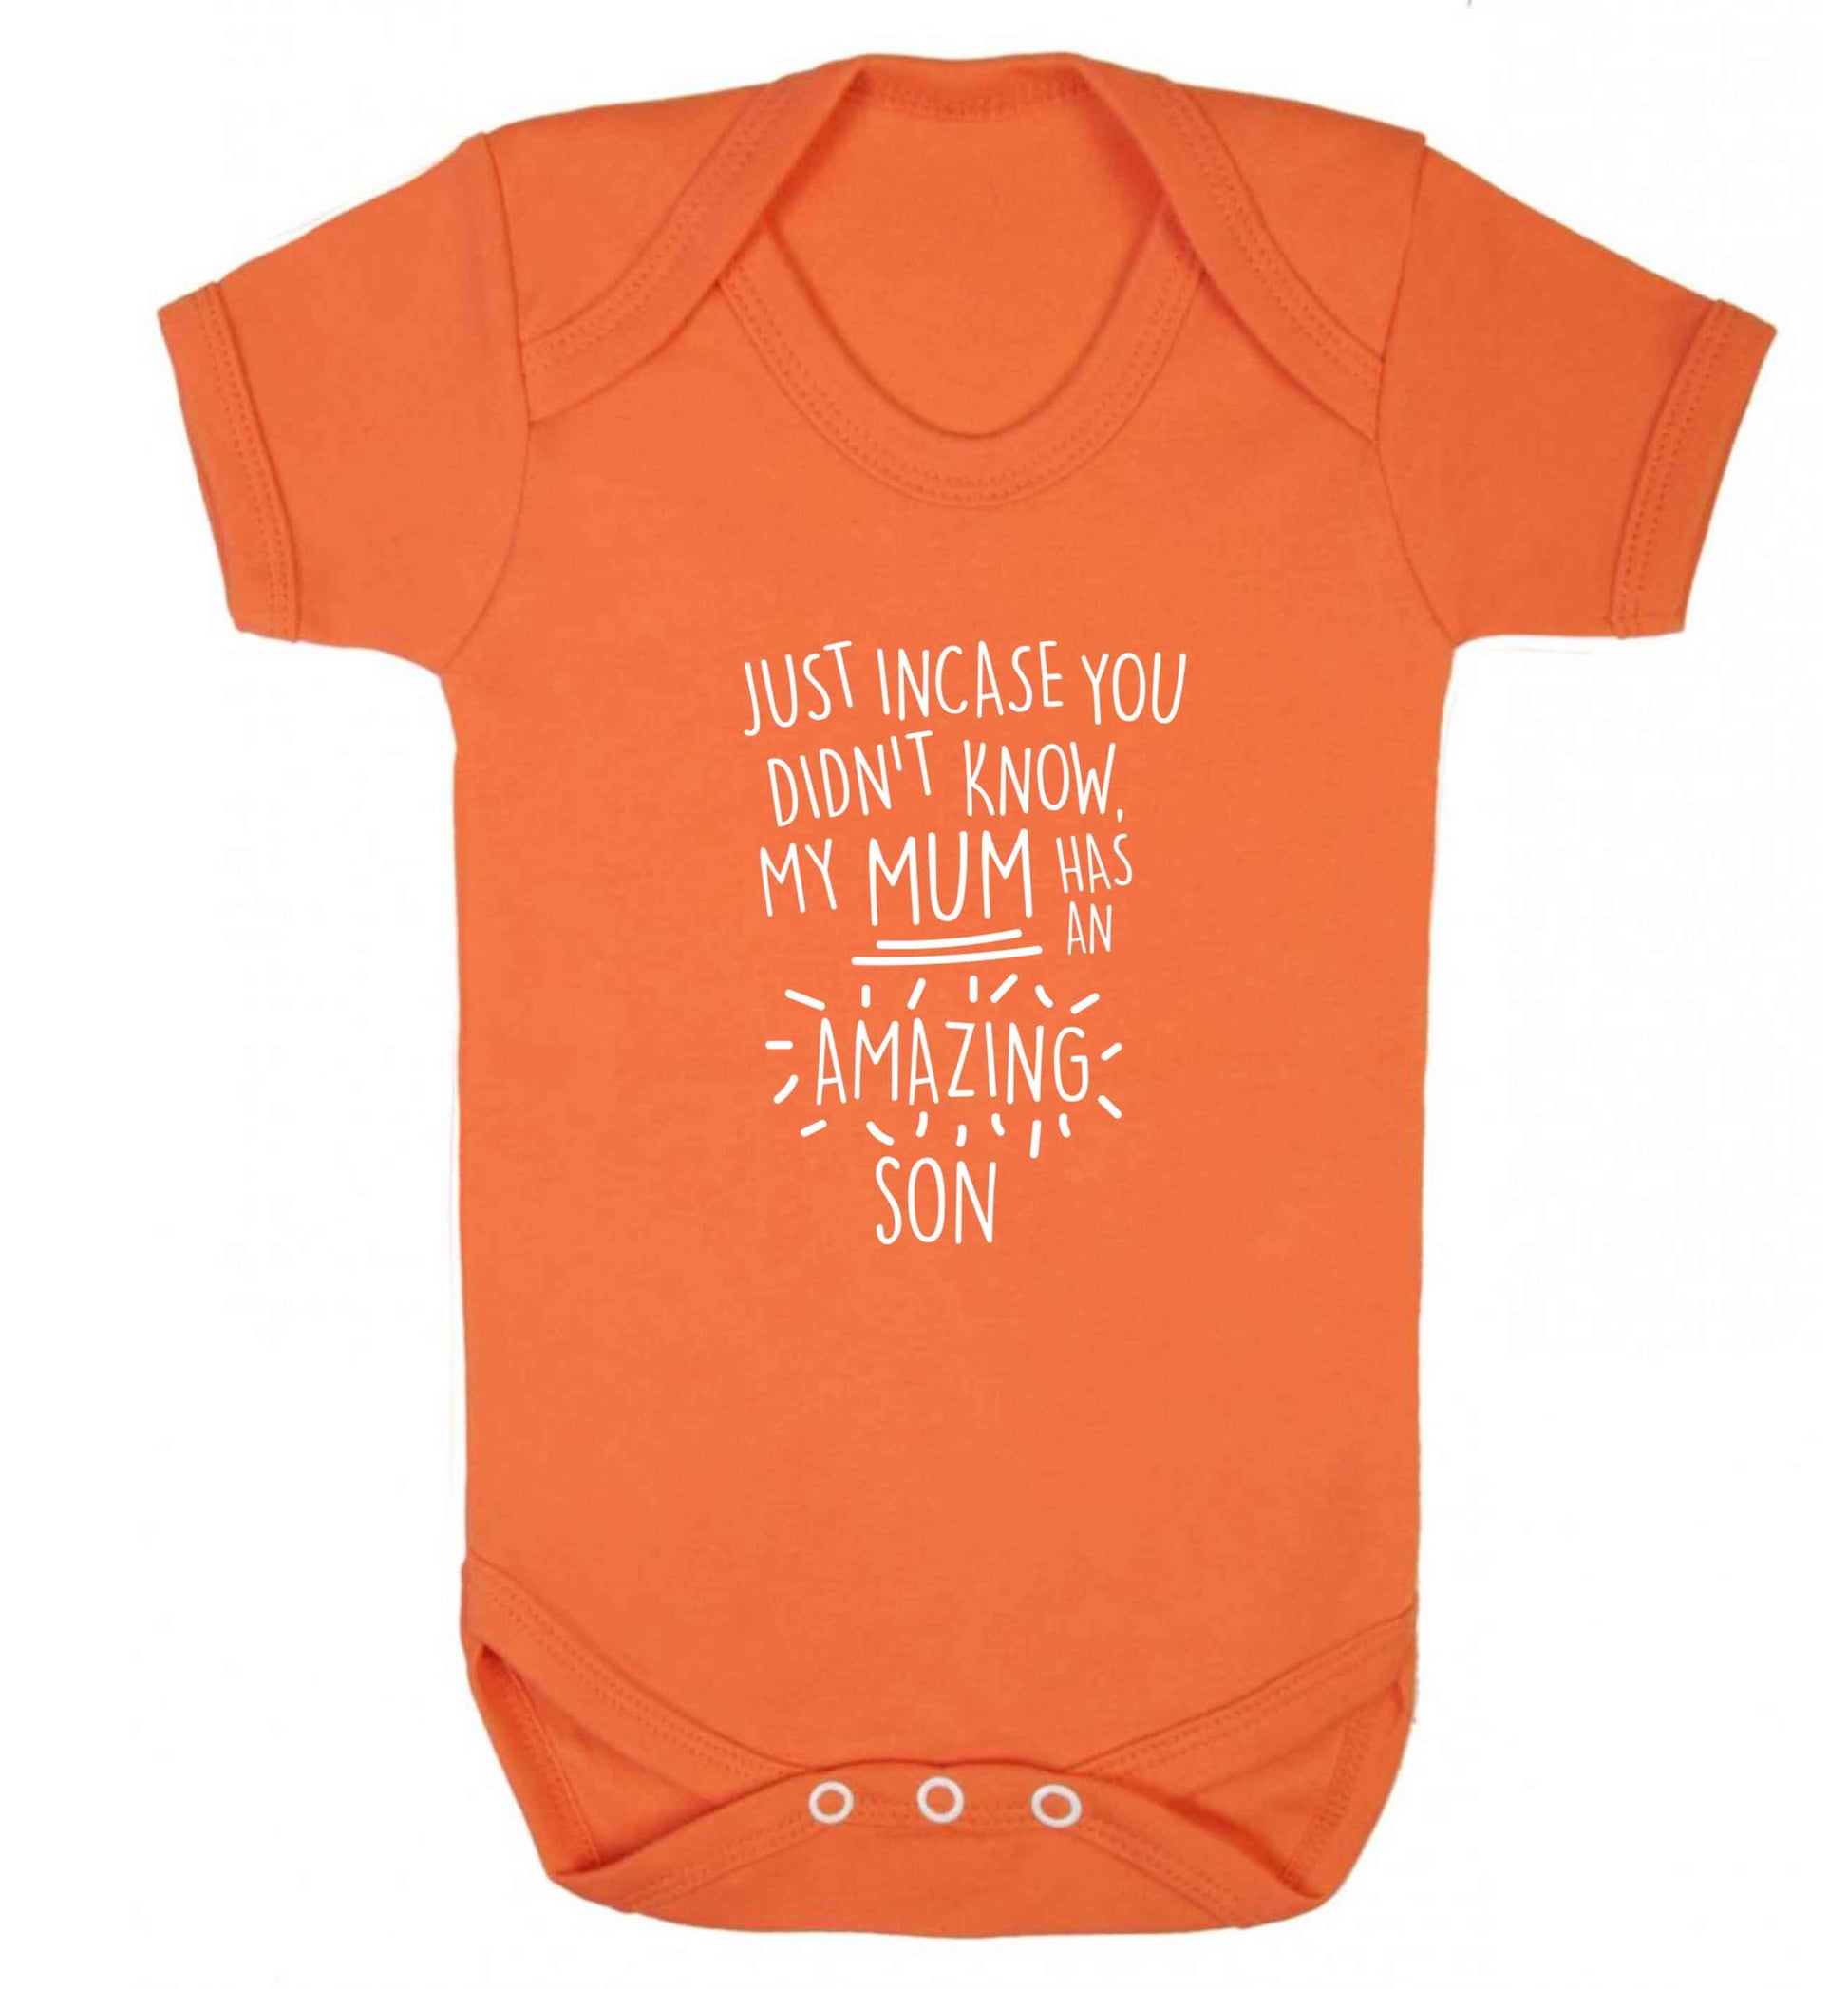 Just incase you didn't know my mum has an amazing son baby vest orange 18-24 months